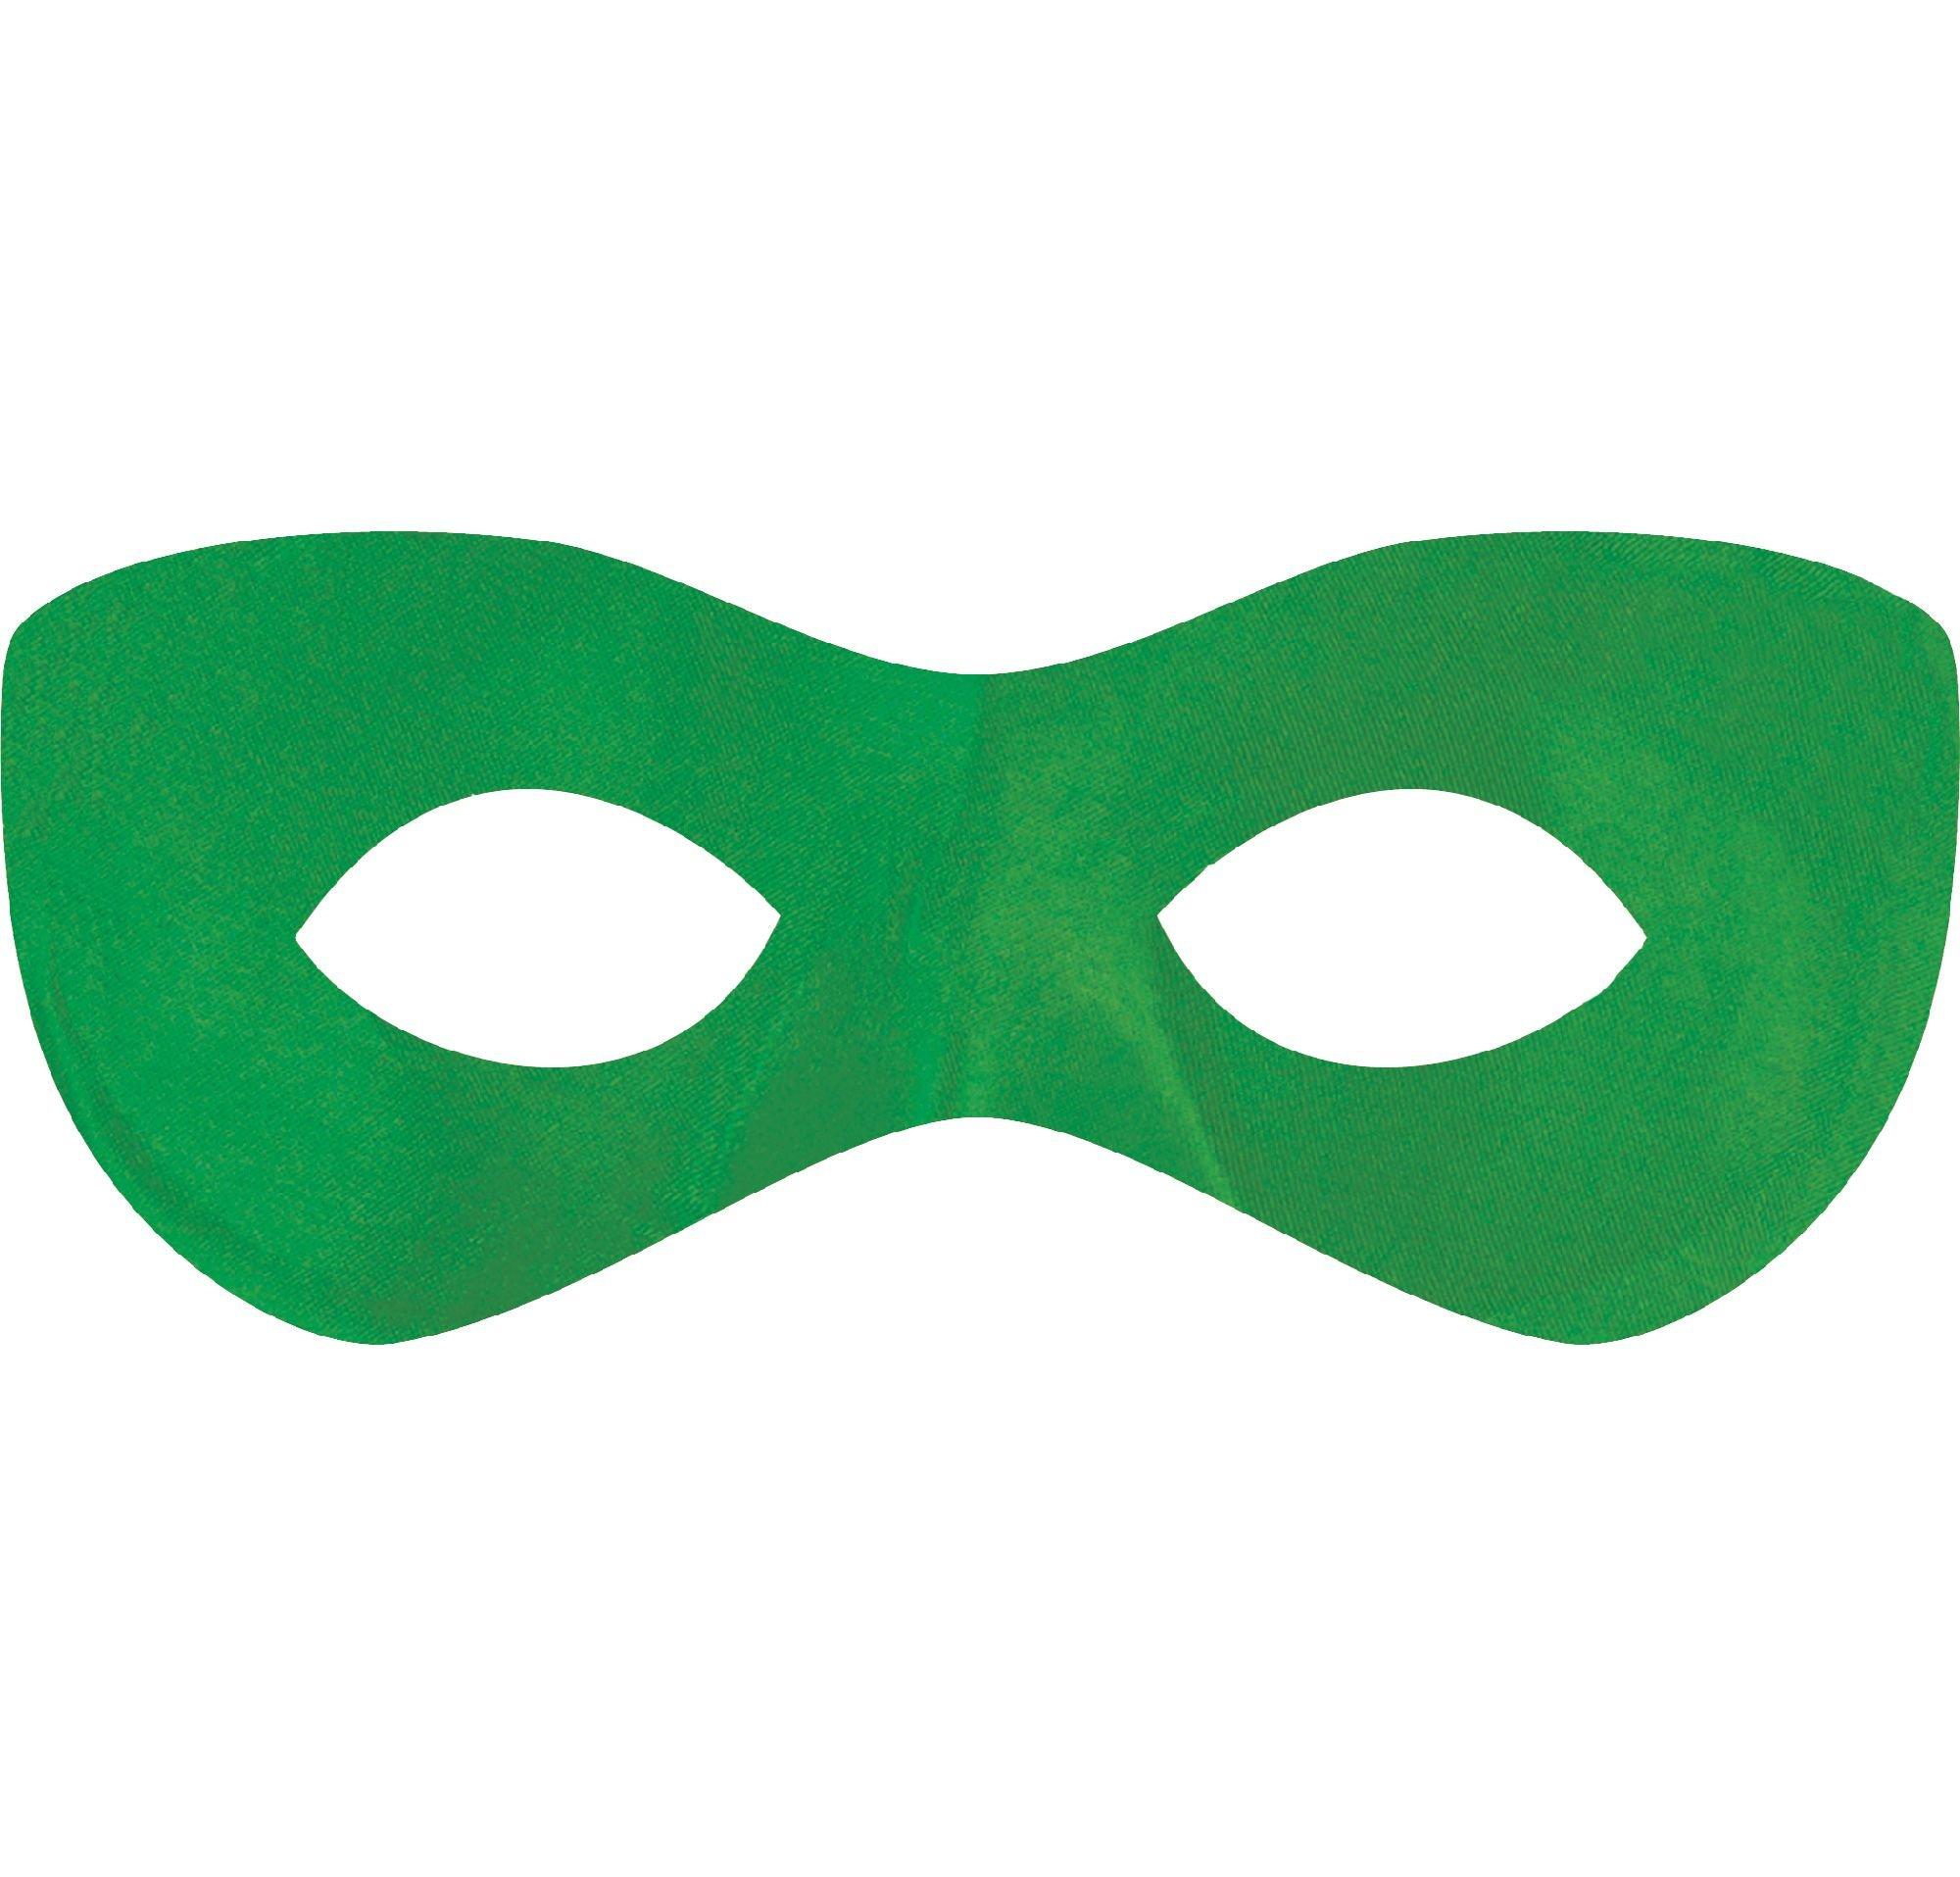 Superhero Mask – Green – The Party Starts Here